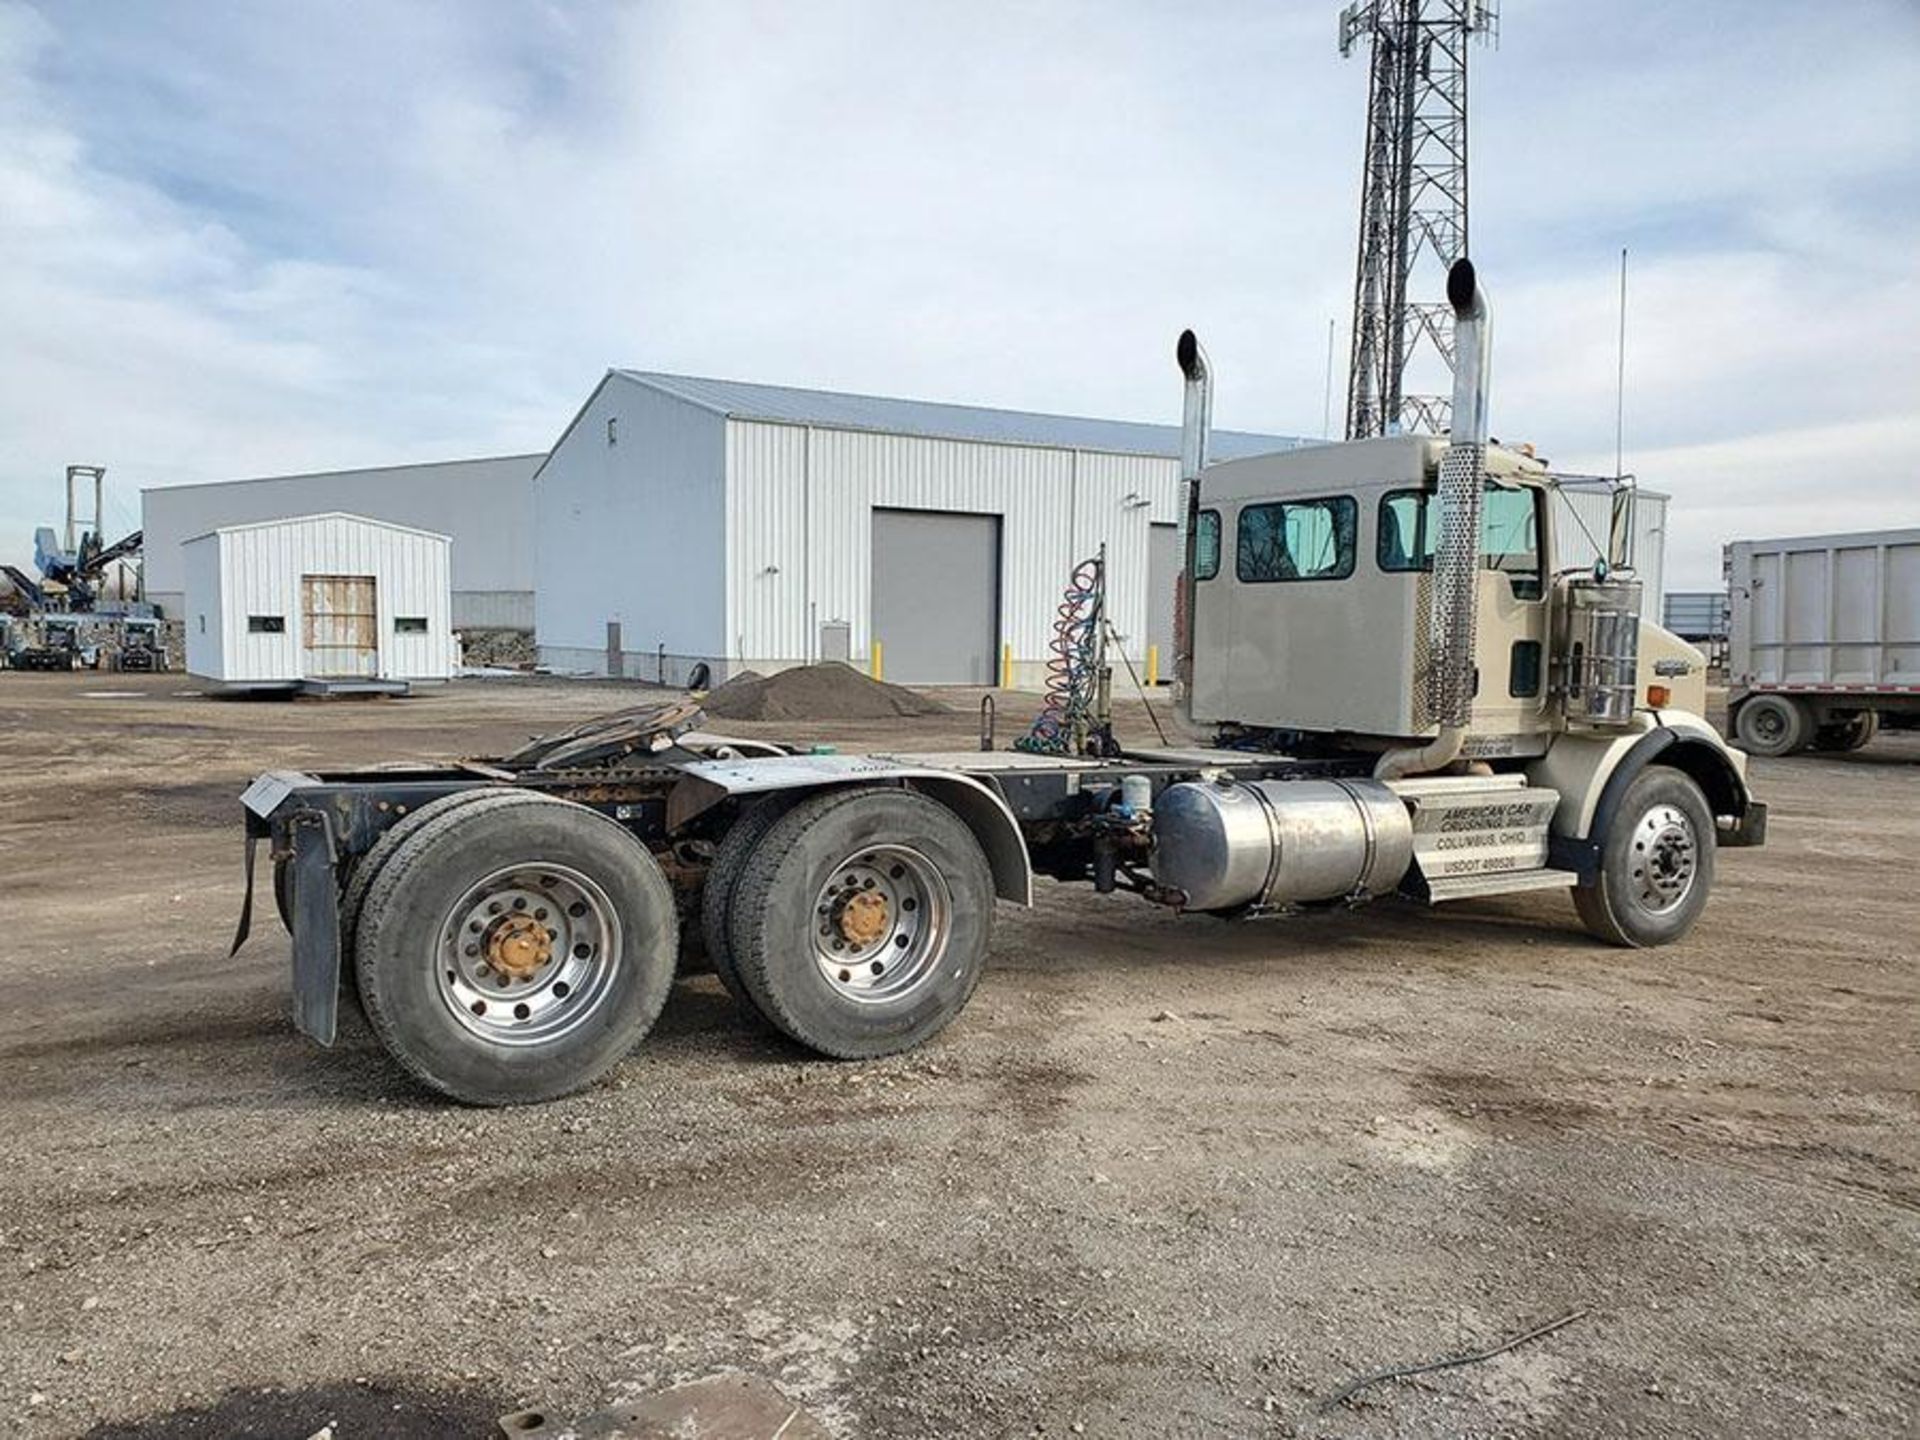 2009 Kenworth Truck Tractors, Vin 1NKDLU0X39J256958, Tandem Axle, Day Cab, Extended Frame, C-13 Engi - Image 9 of 13